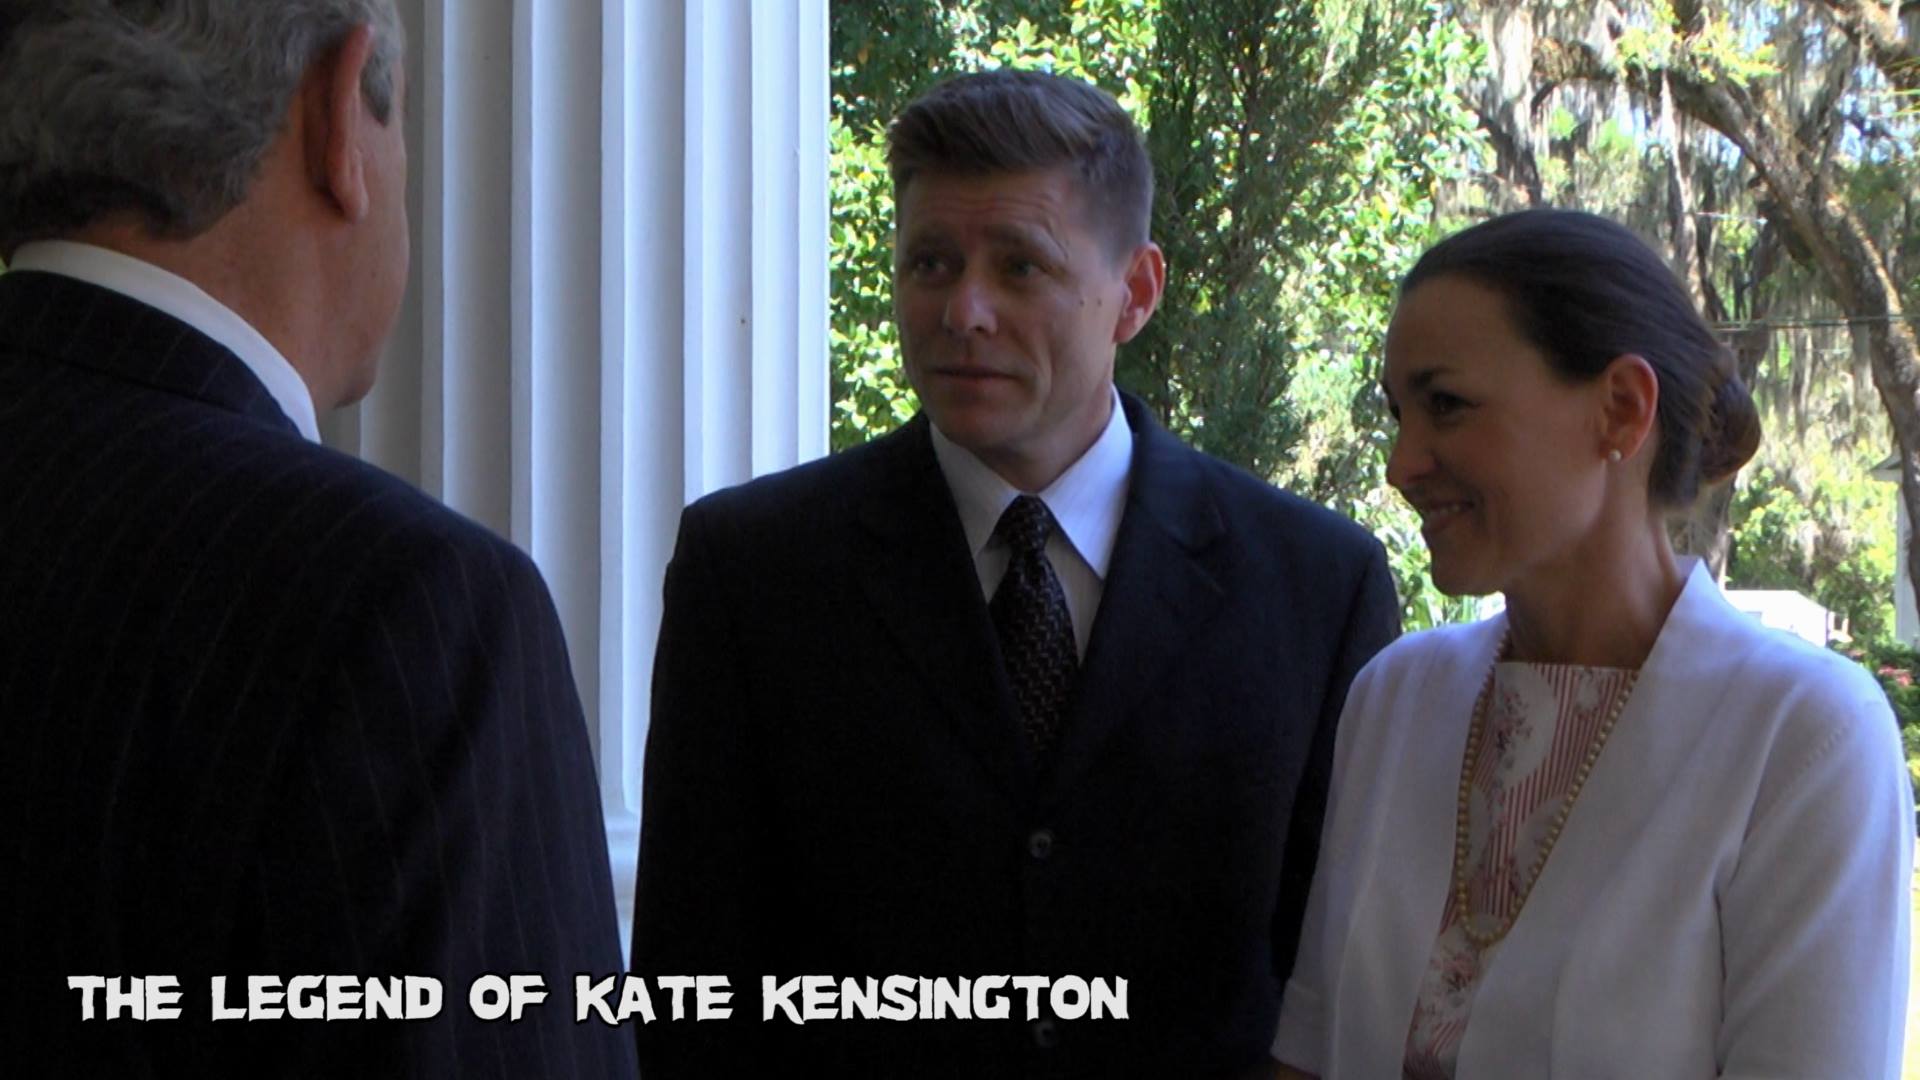 from the set of: The Legend Of Kate Kensington